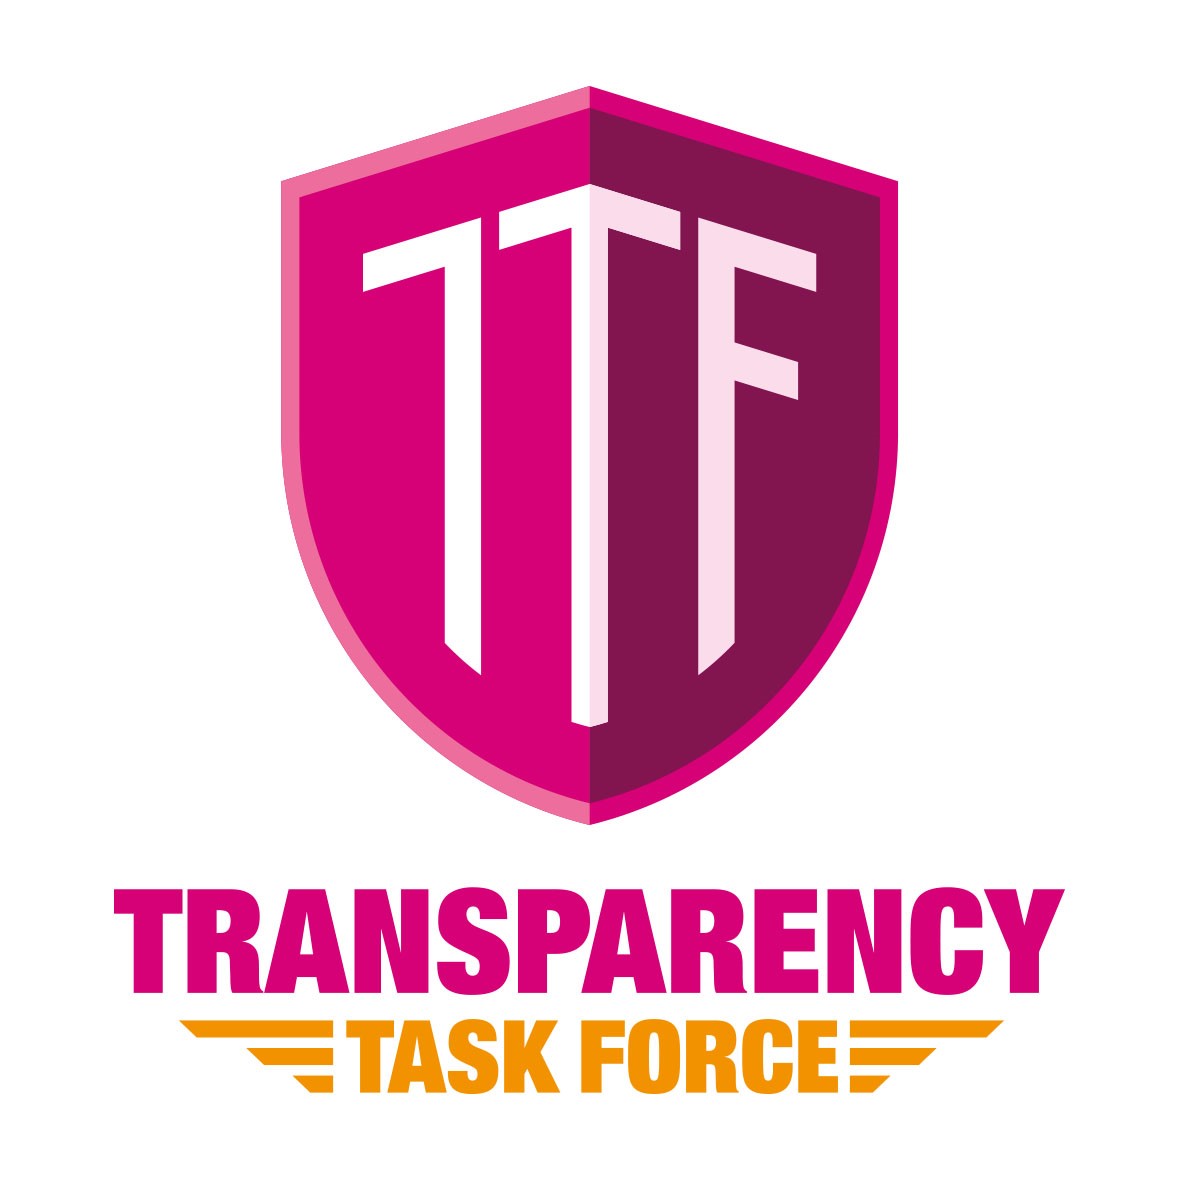 Why our financial regulatory framework is failing; and what should be done about it - ONLINE VIA ZOOM organized by The Transparency Task Force